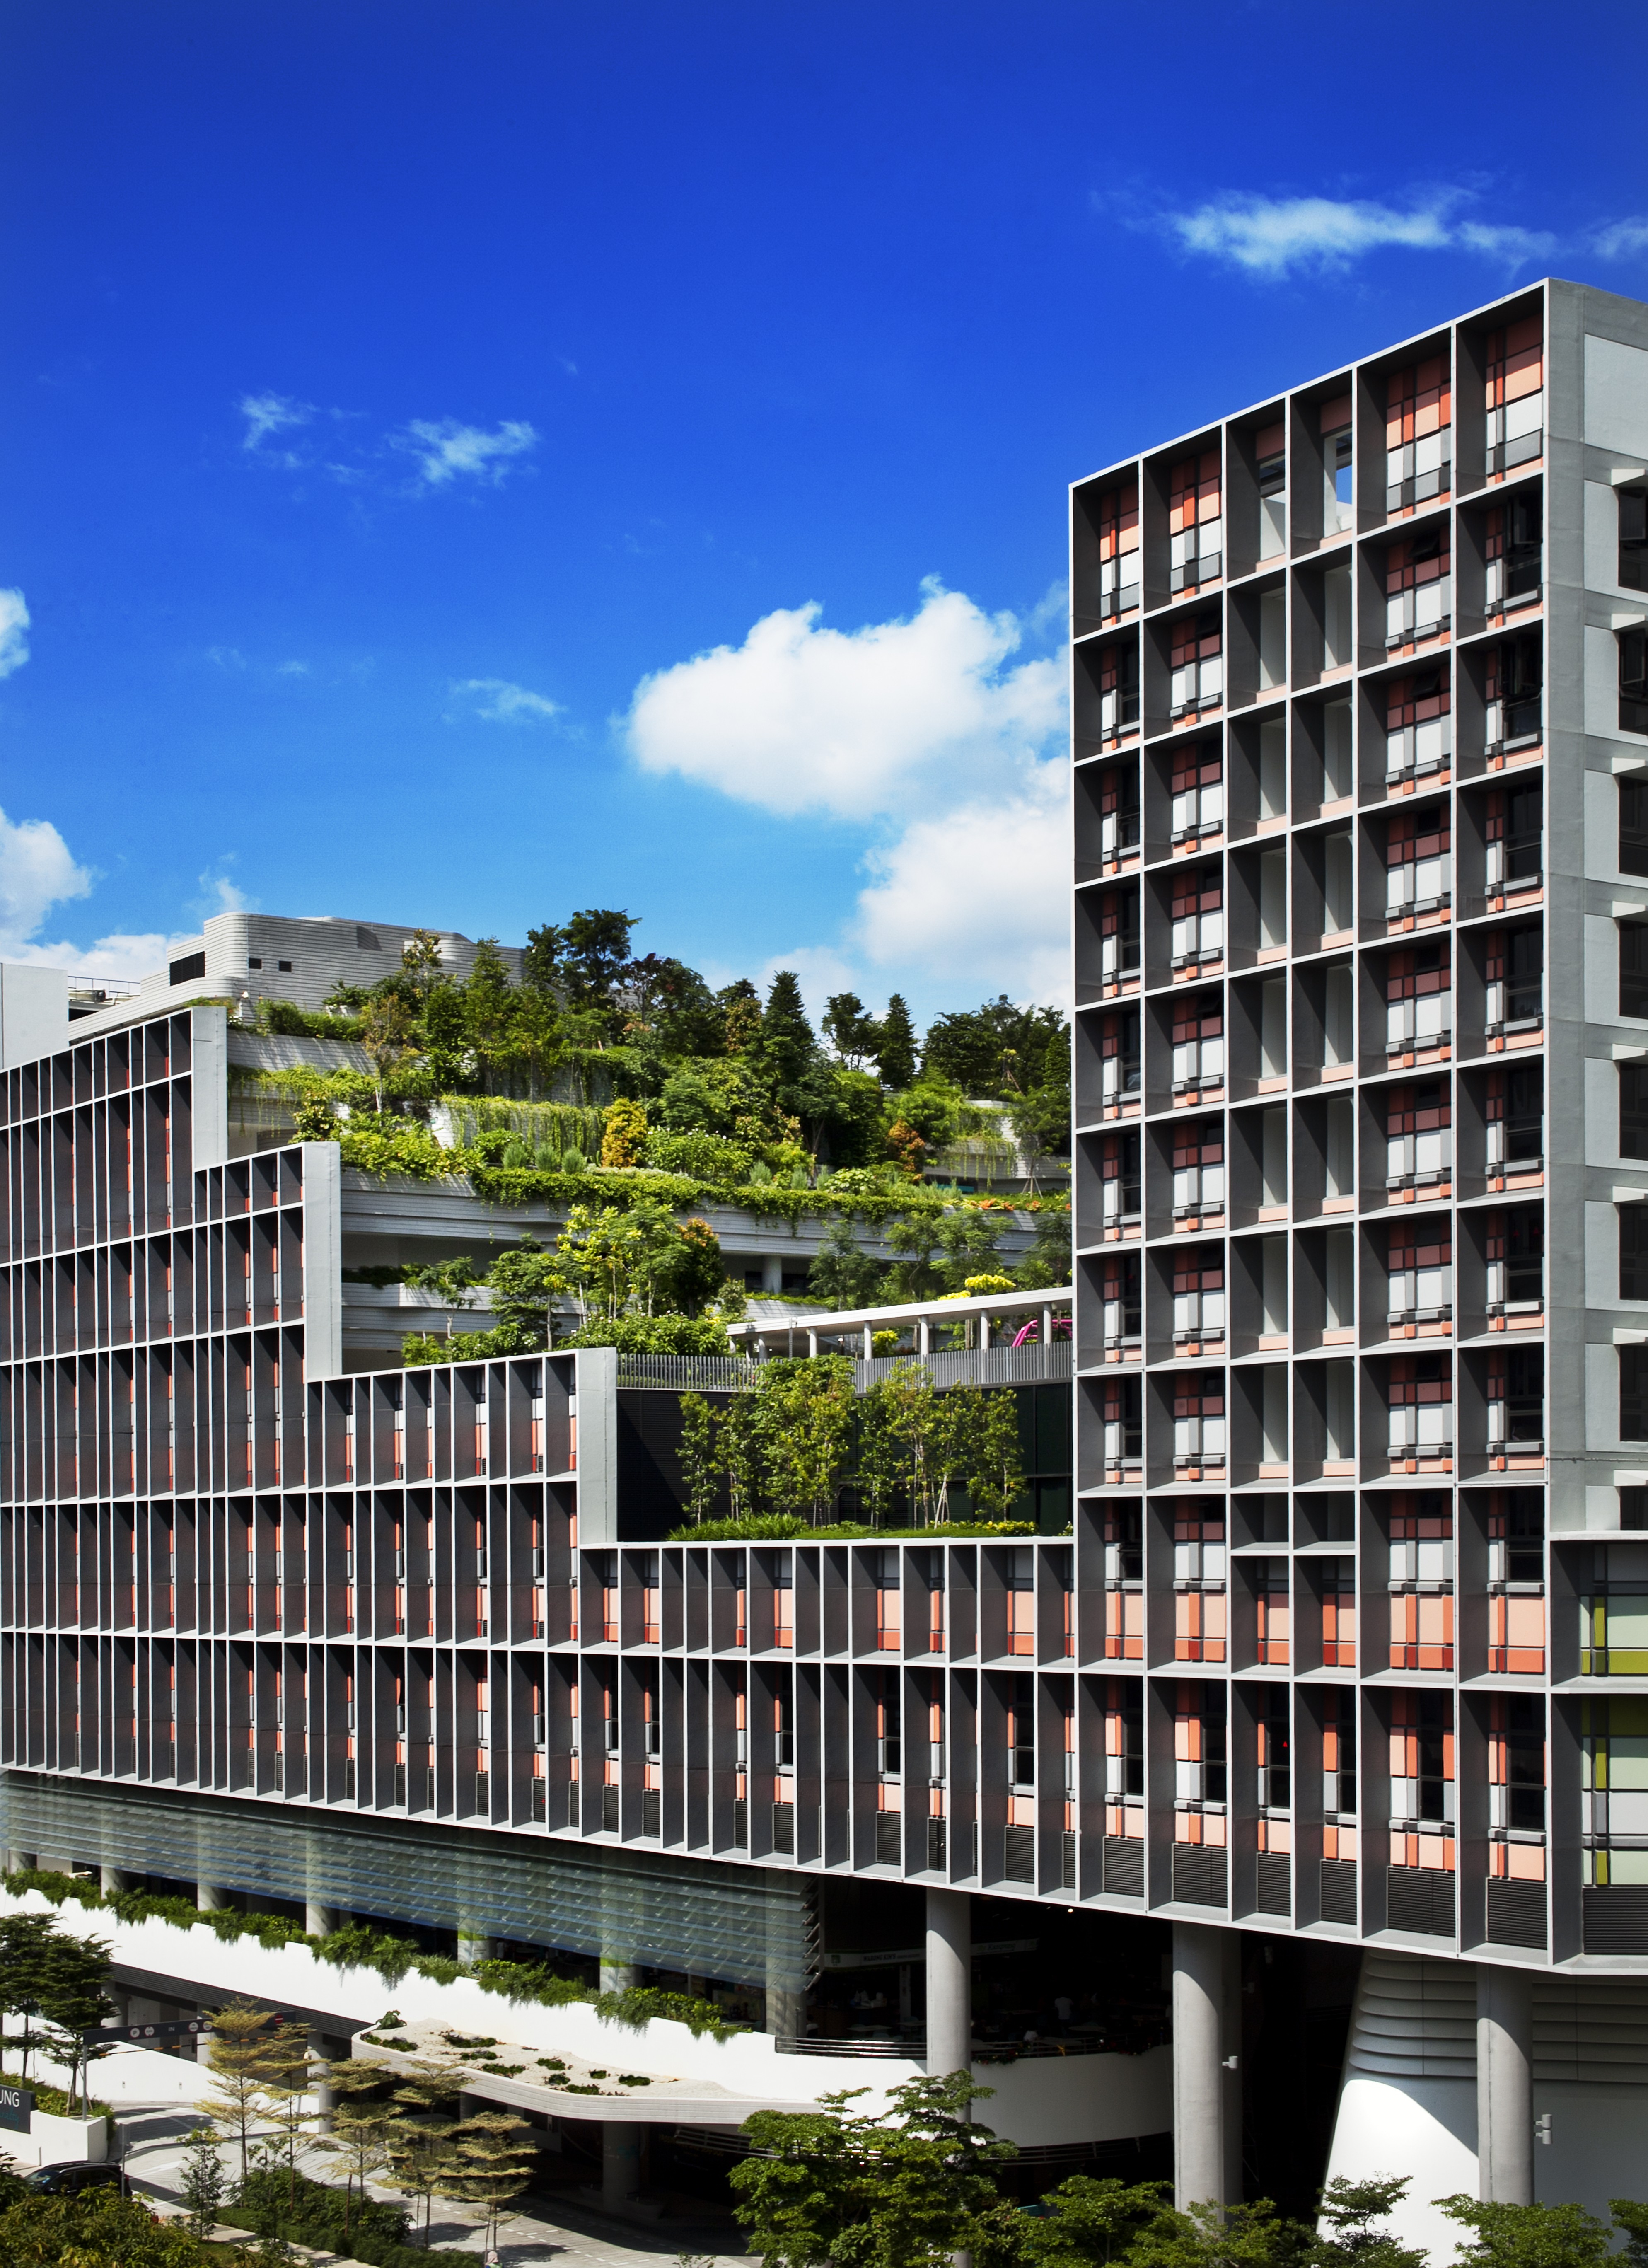 Kampung Admiralty, a mixed-use public housing project by architecture firm WOHA, in Singapore.